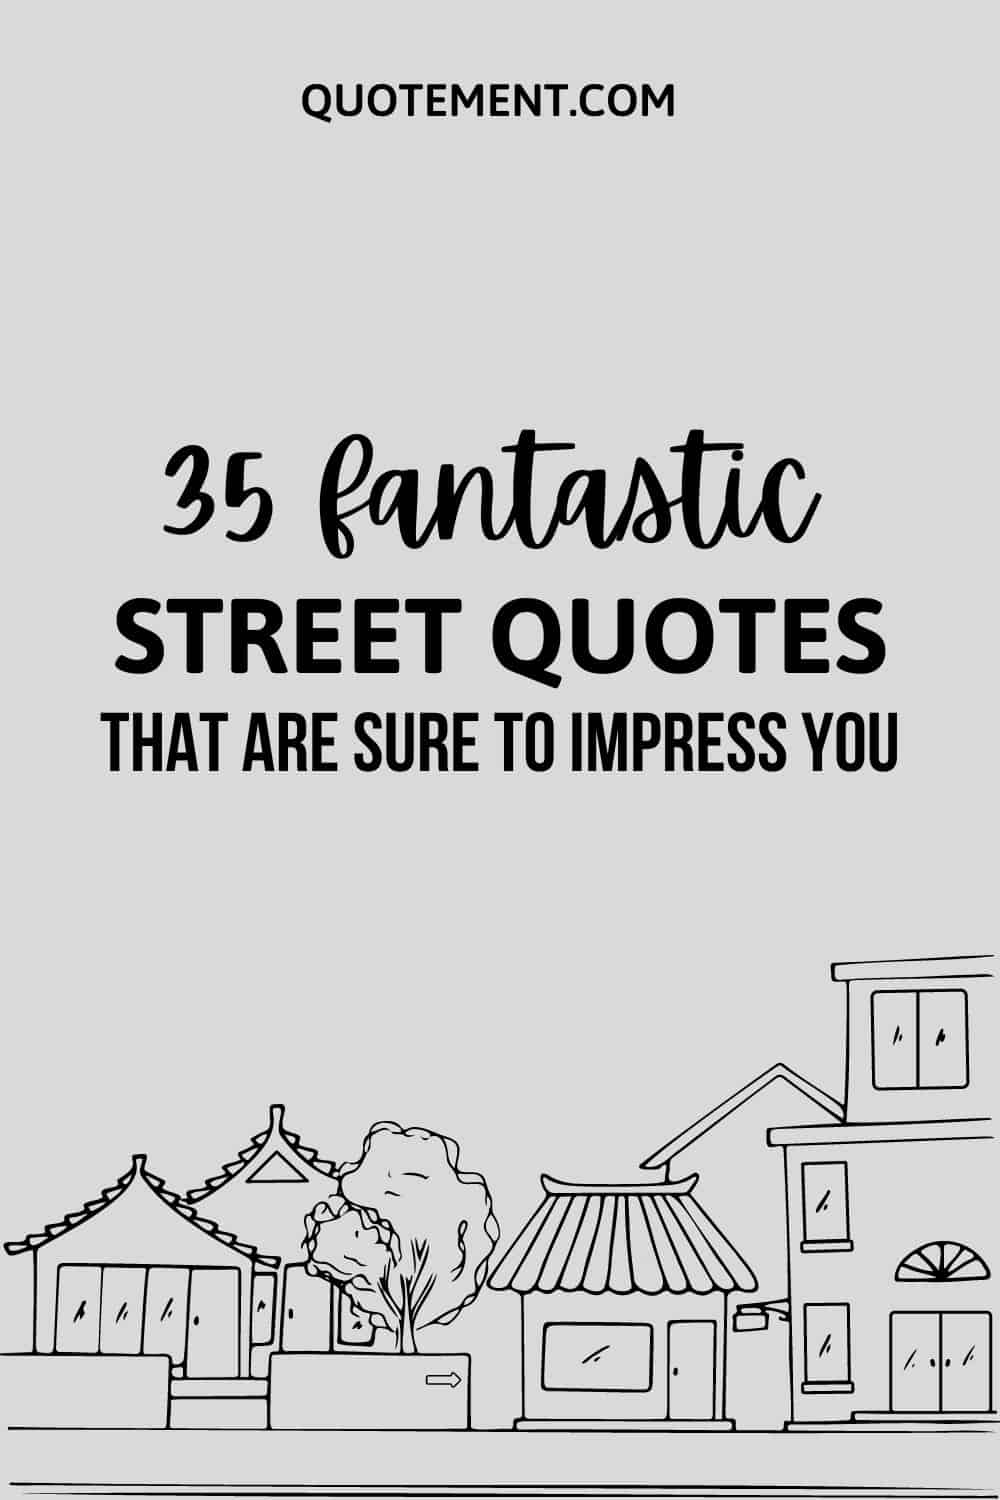 35 Fantastic Street Quotes That Are Sure To Impress You
